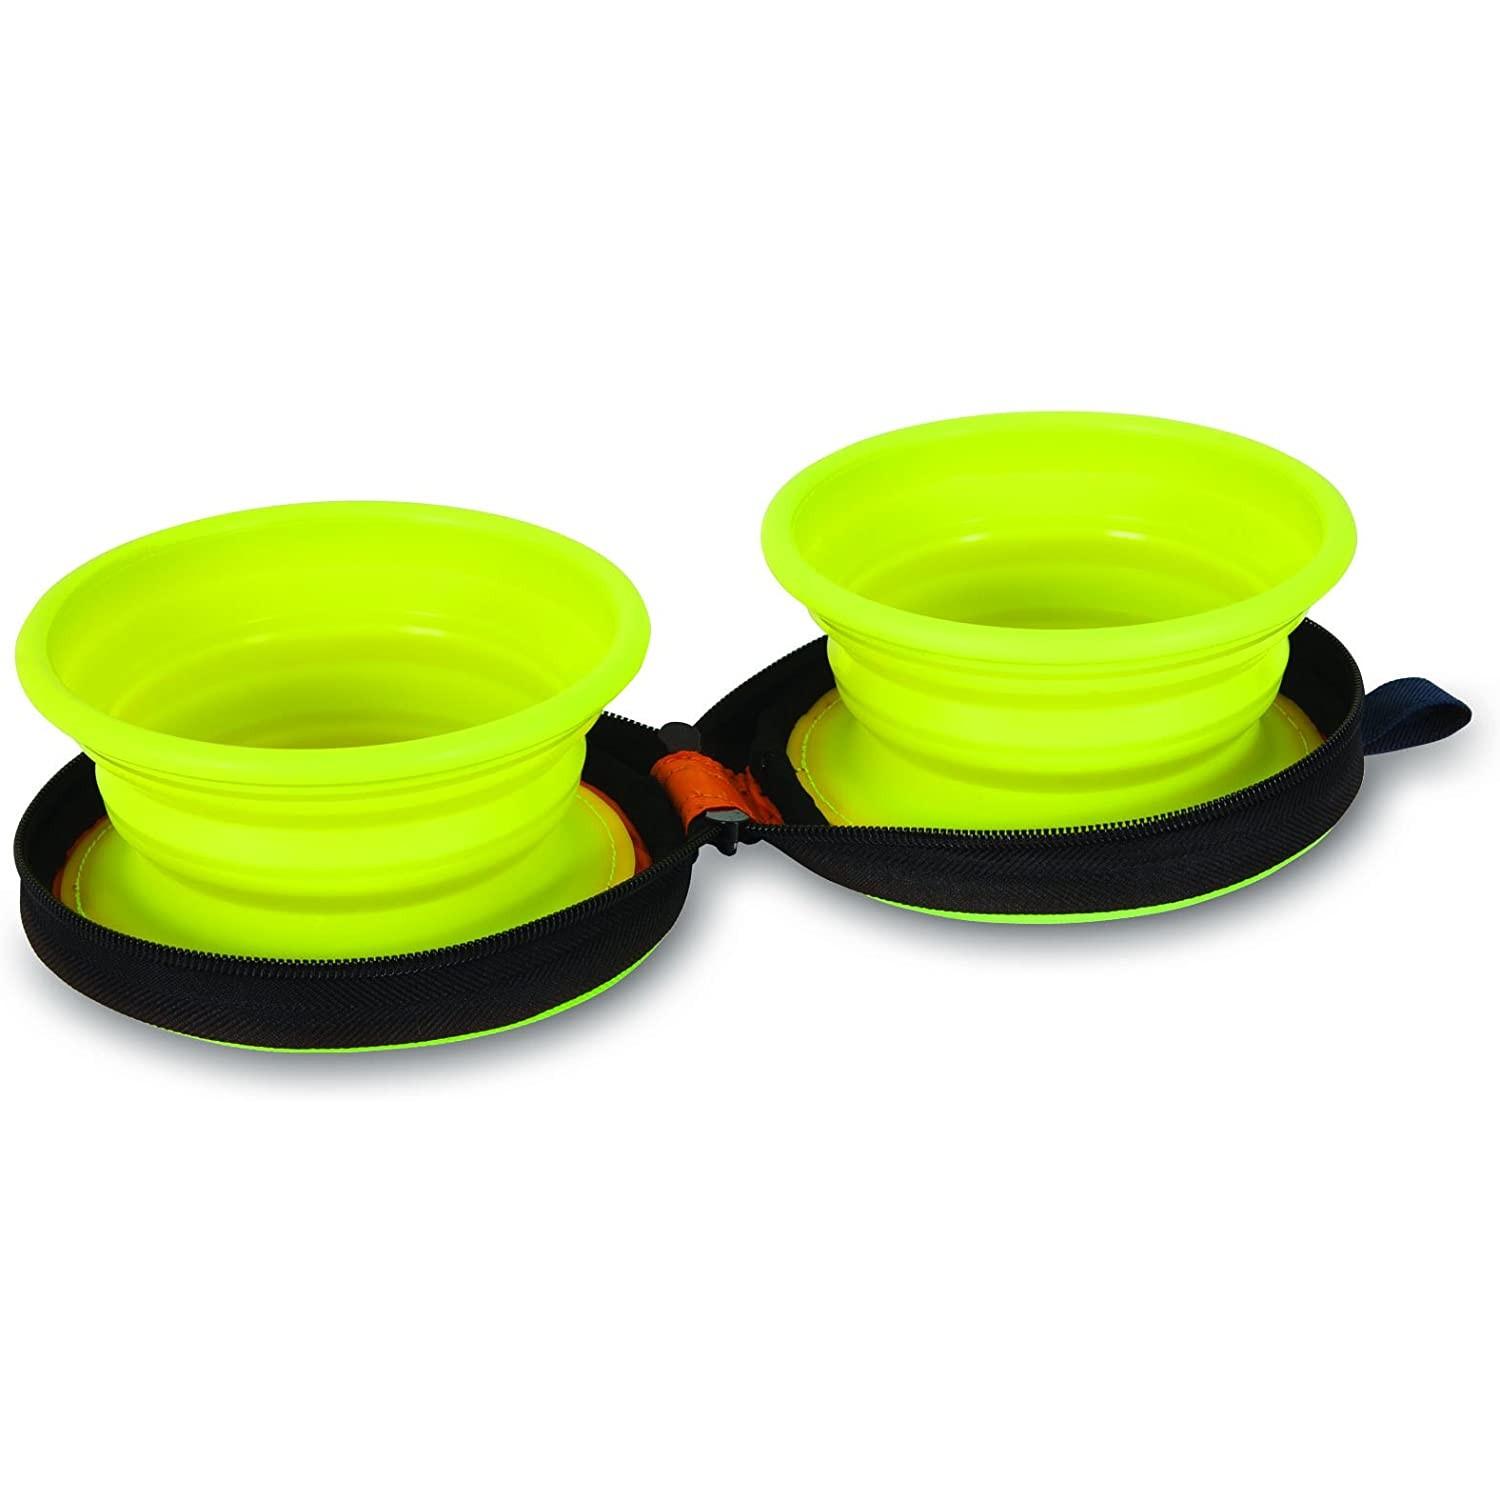 Petmate Silicone Duo Travel Bowl for Dogs and Cats